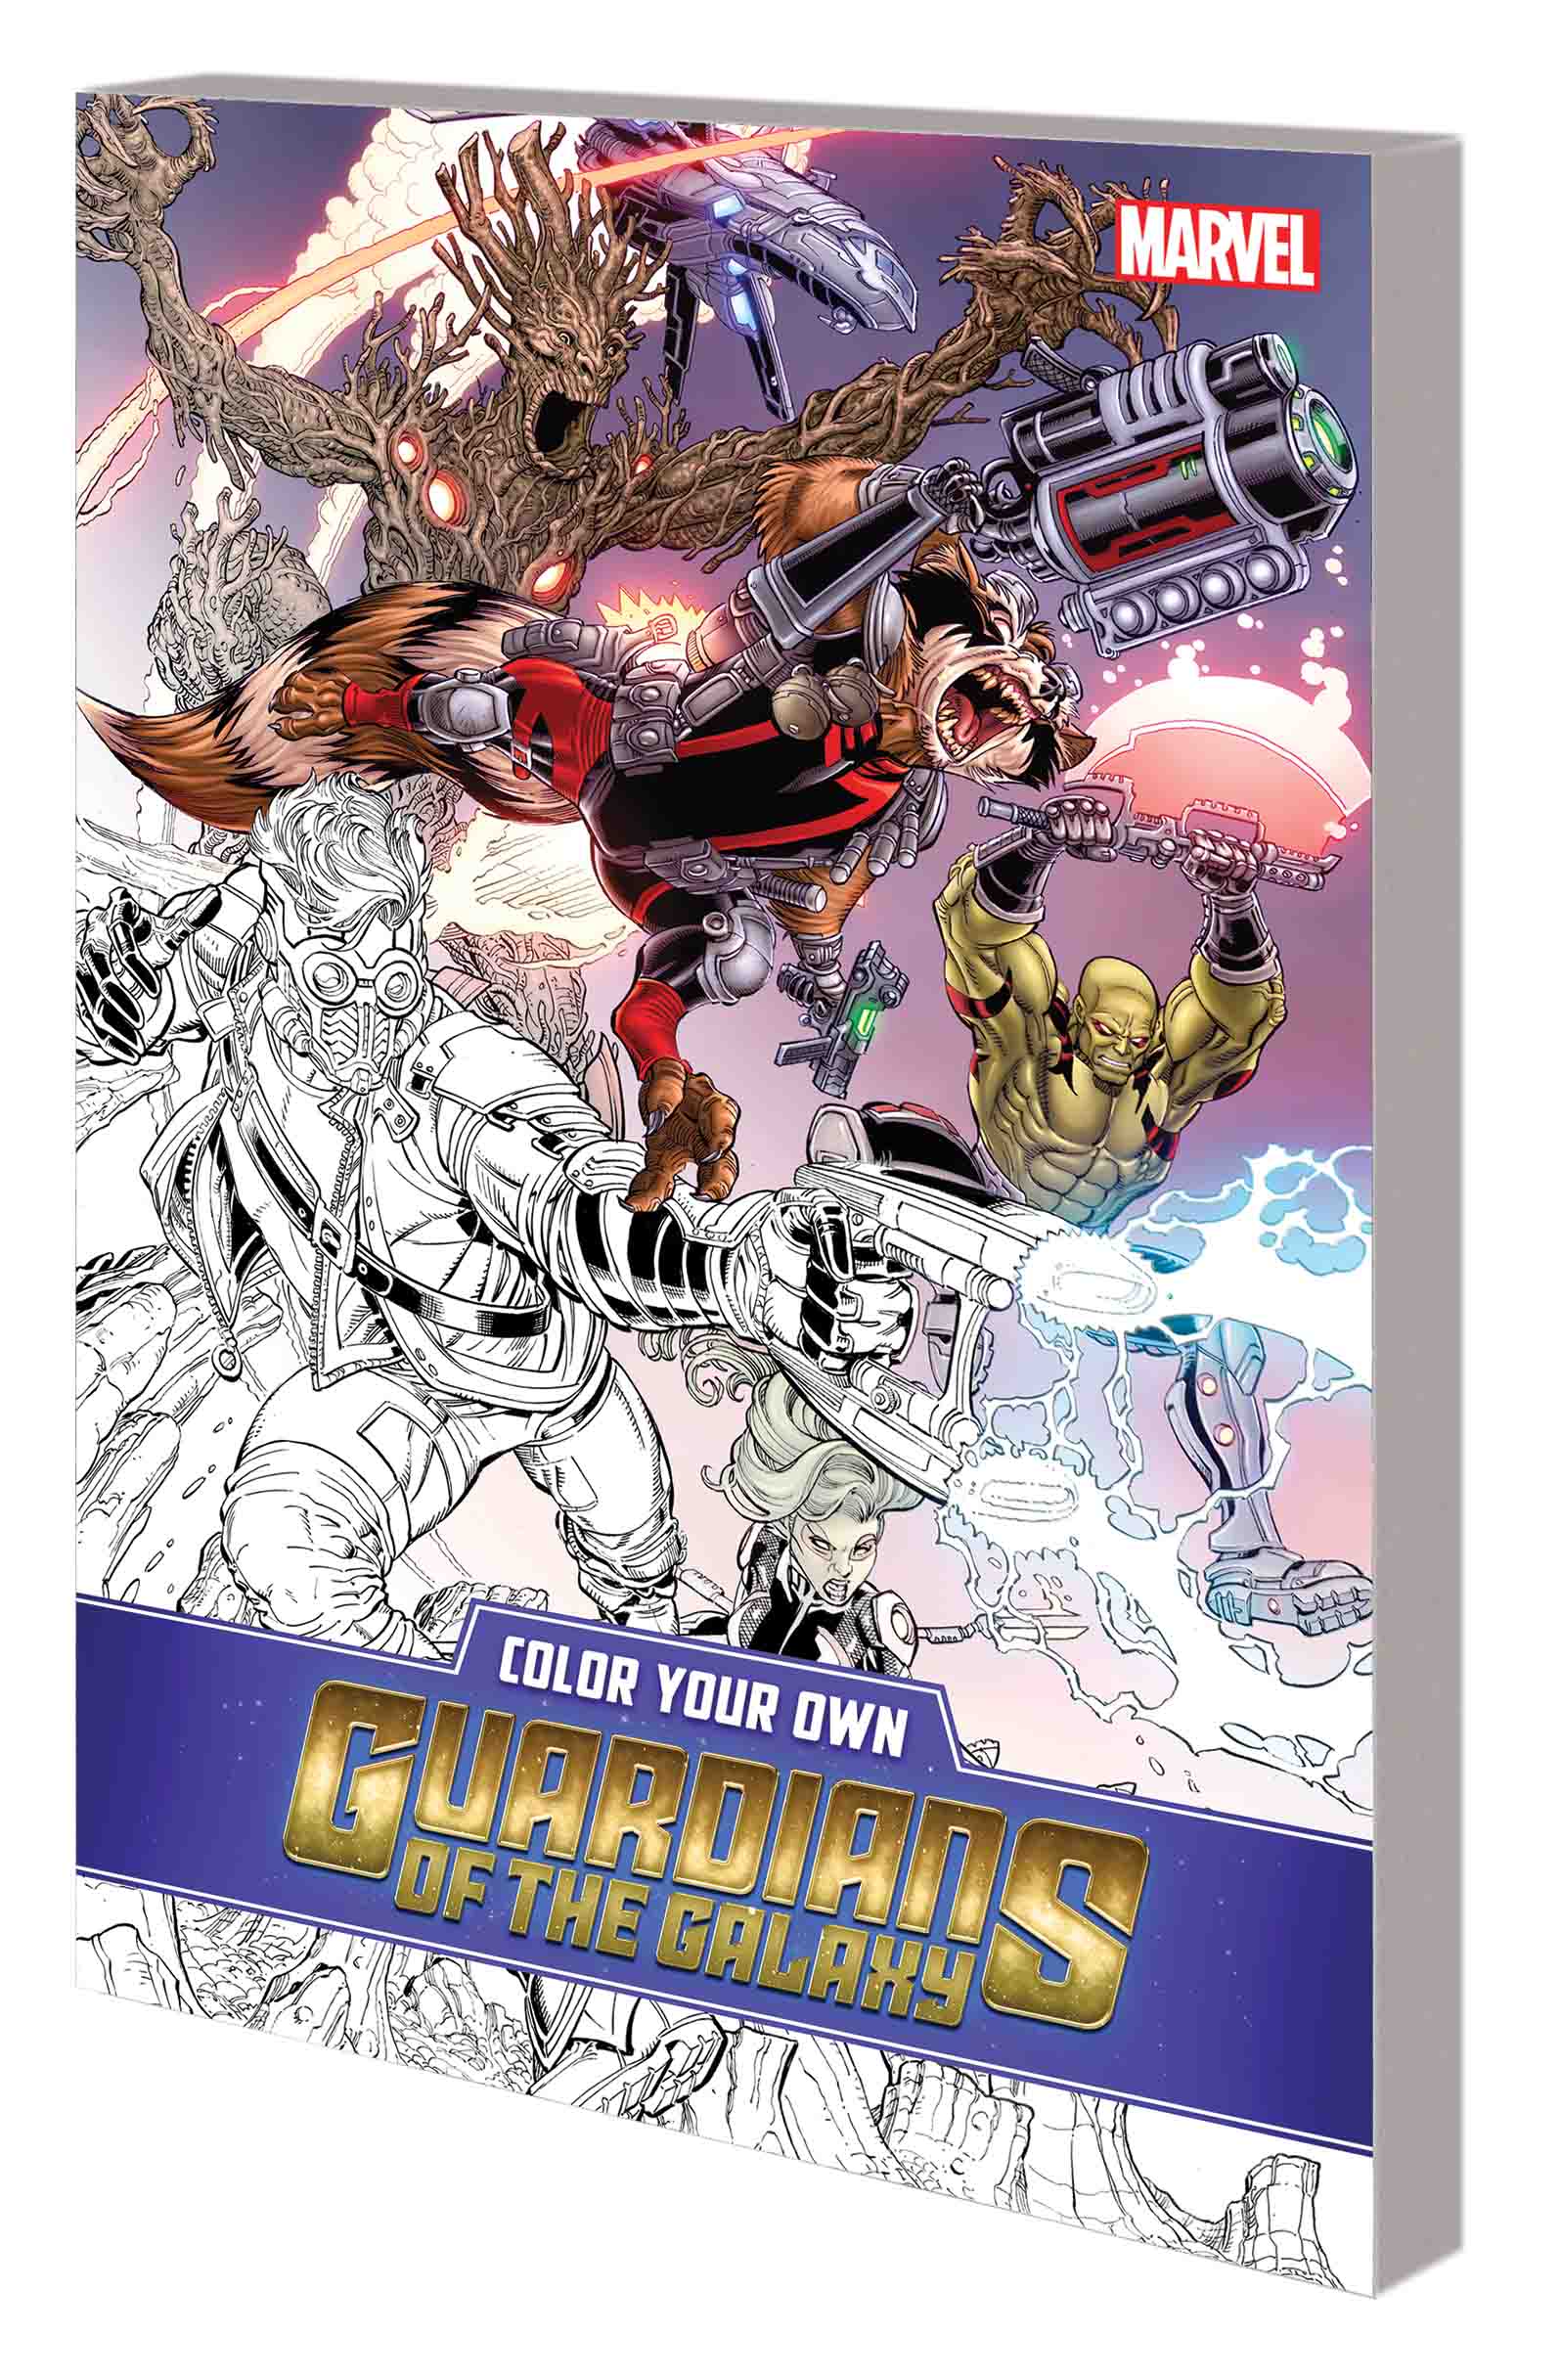 COLOR YOUR OWN GUARDIANS OF THE GALAXY